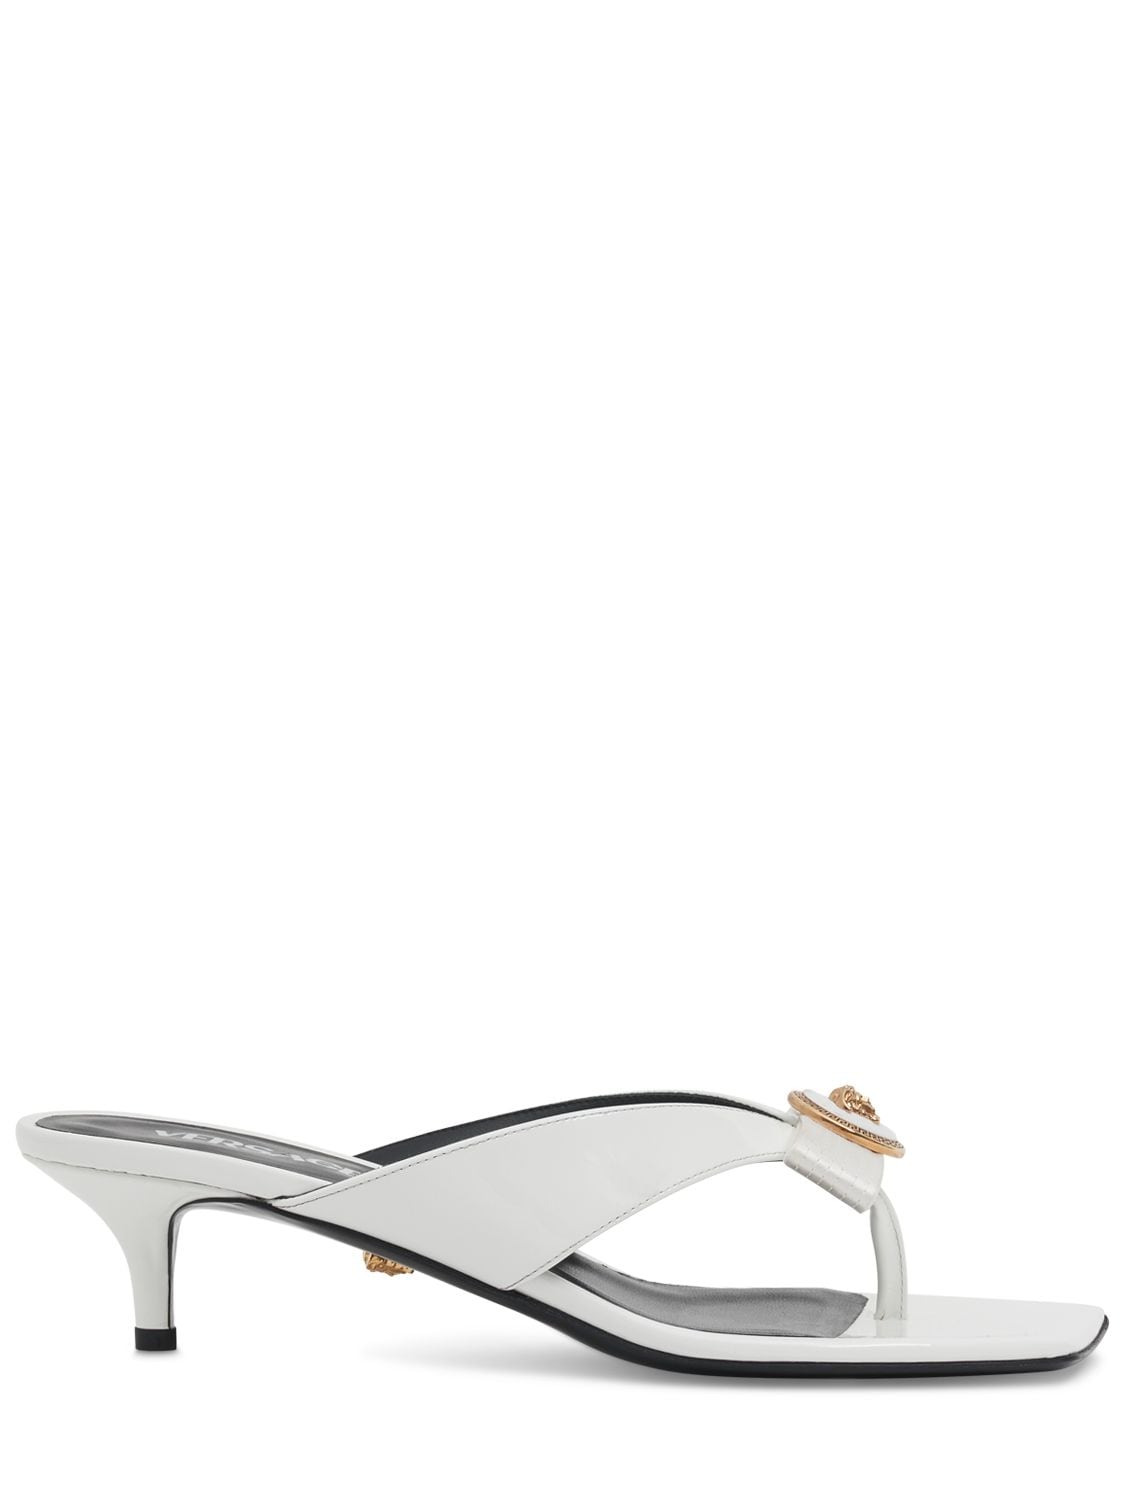 Image of 45mm Patent Leather Sandals